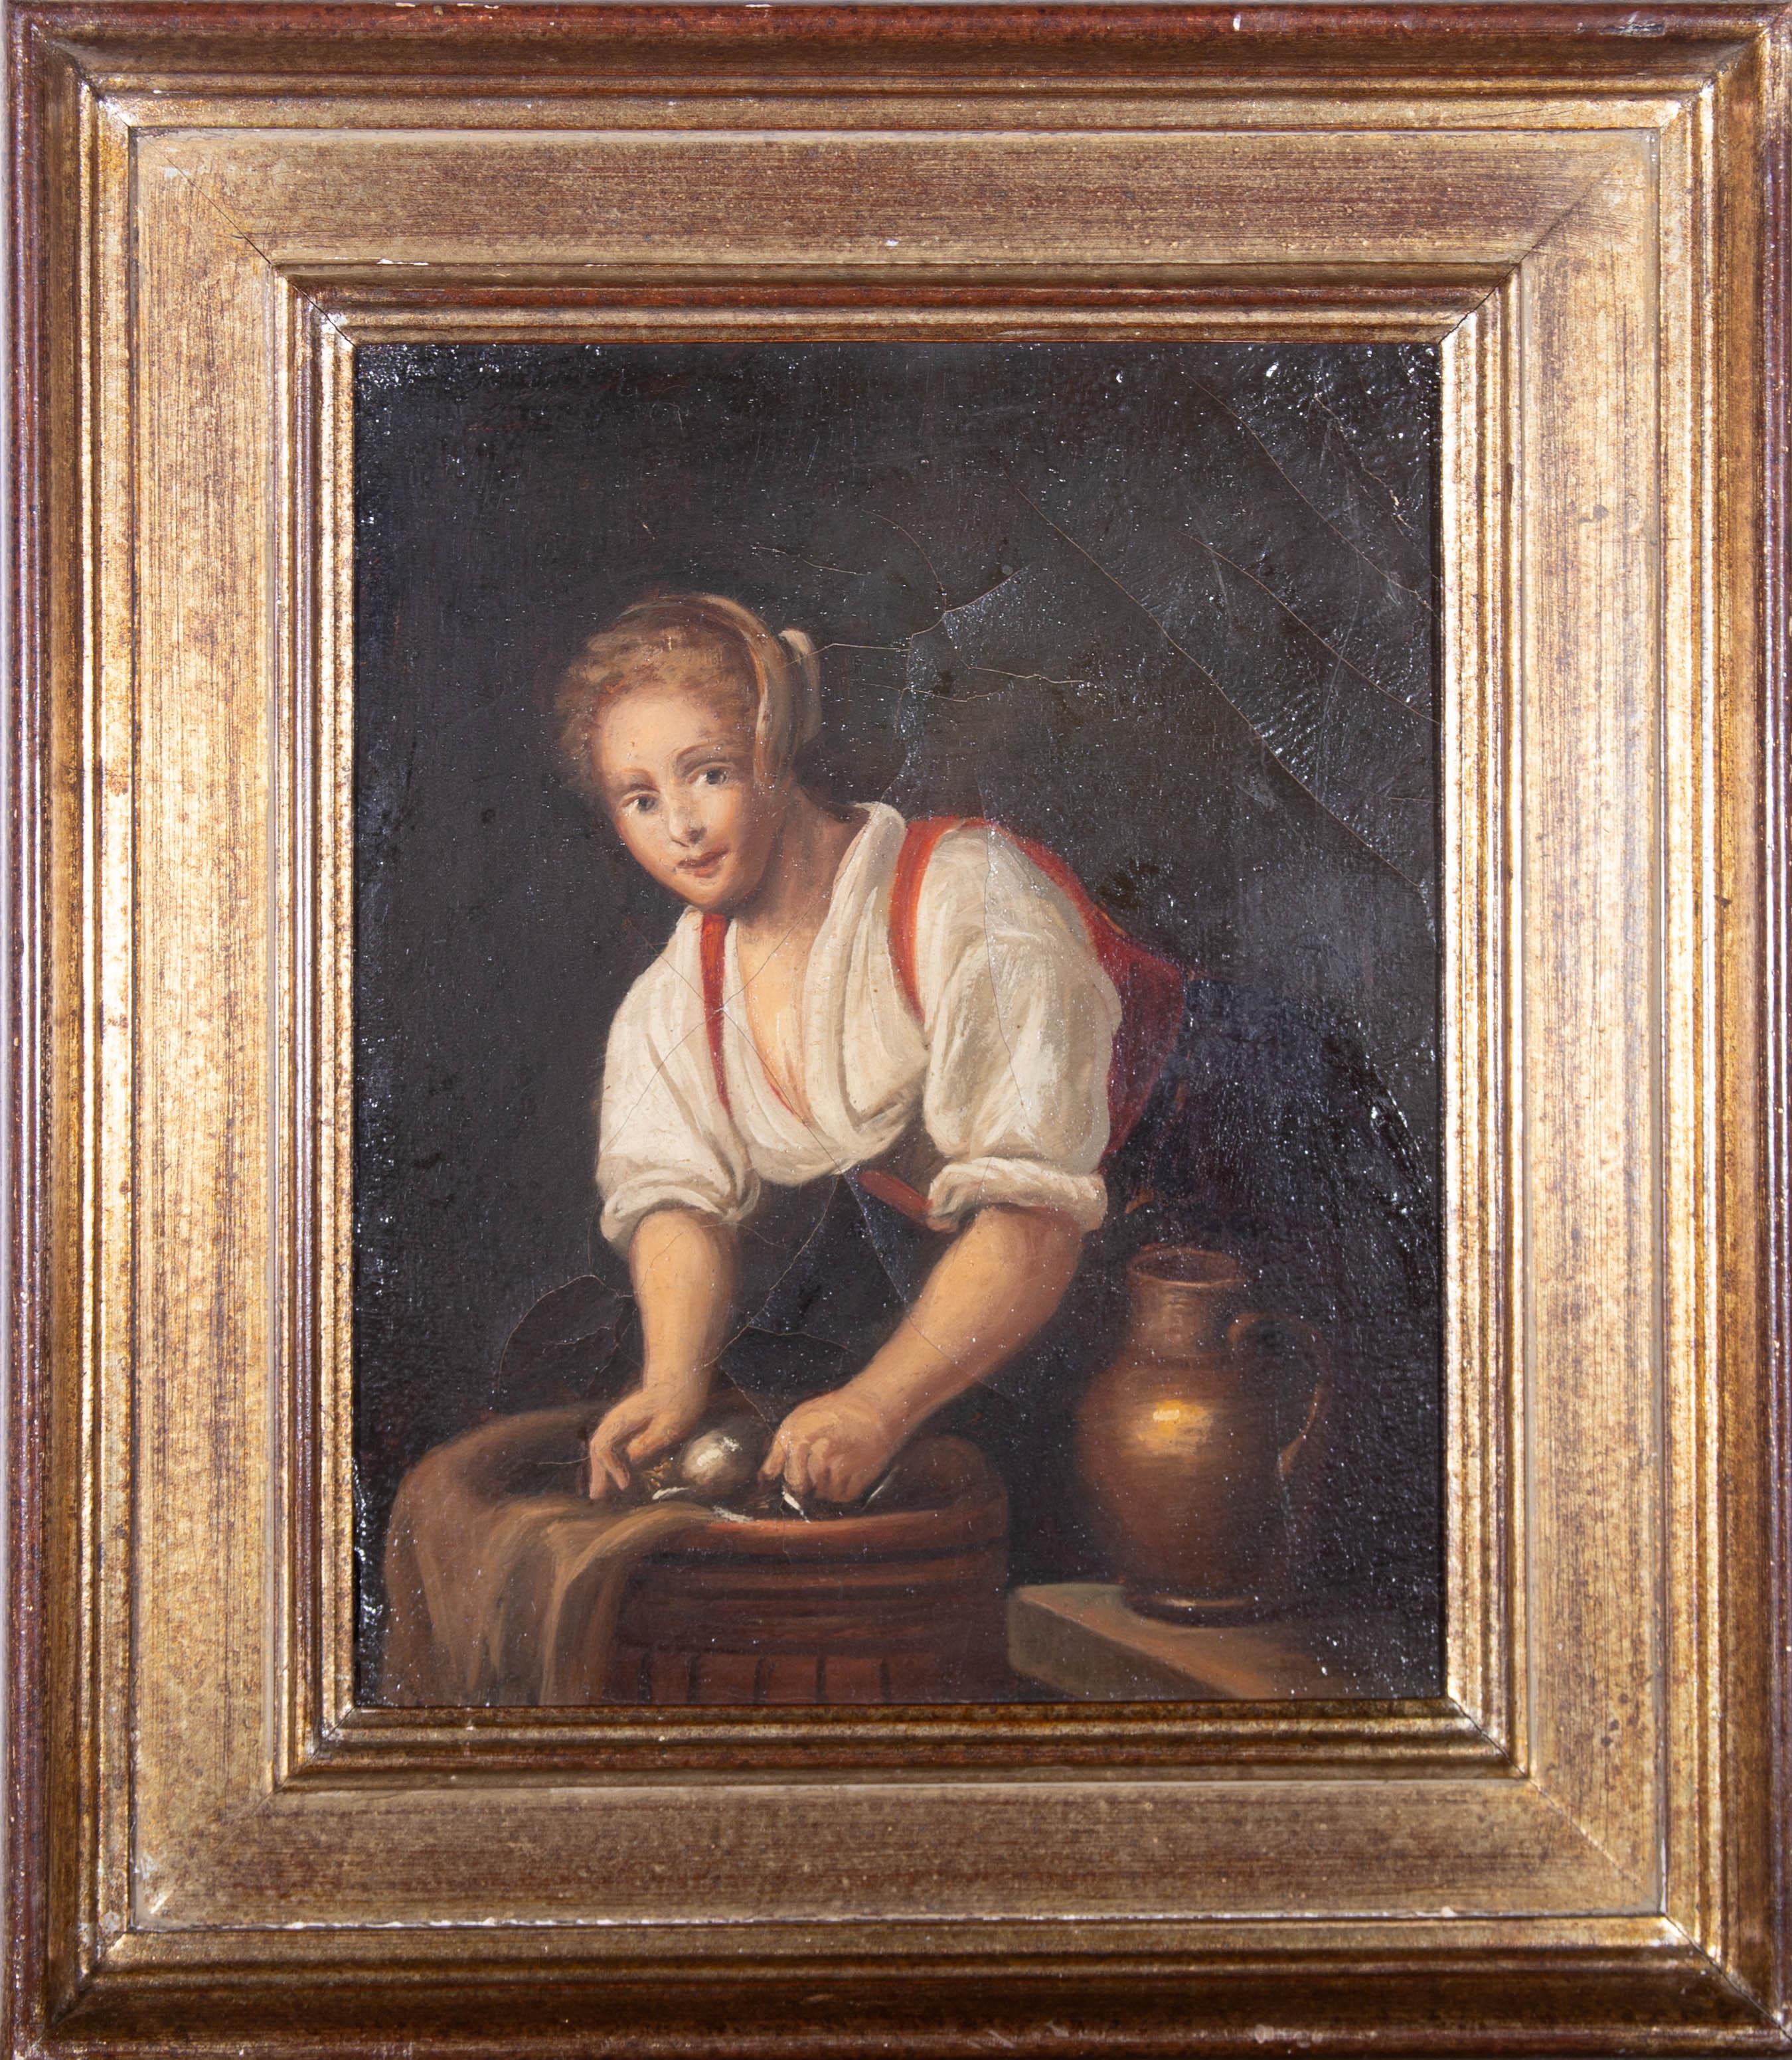 Unknown Figurative Painting - Dutch-Style Mid 19th Century Oil - Peasant Woman